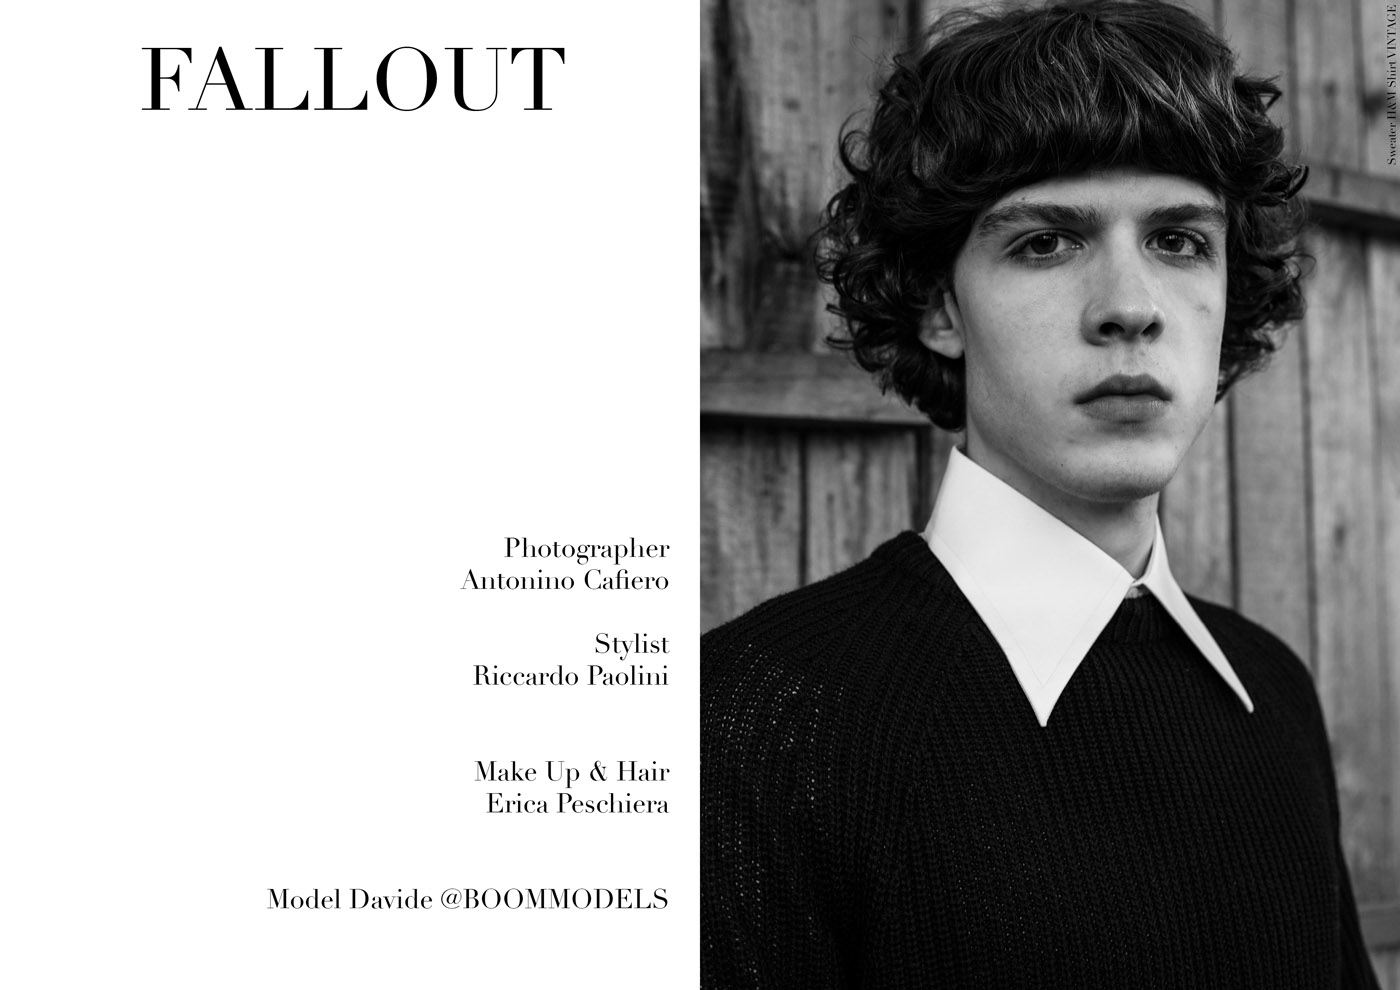 FALLOUT by Antonino Cafiero for CHASSEUR MAGAZINE